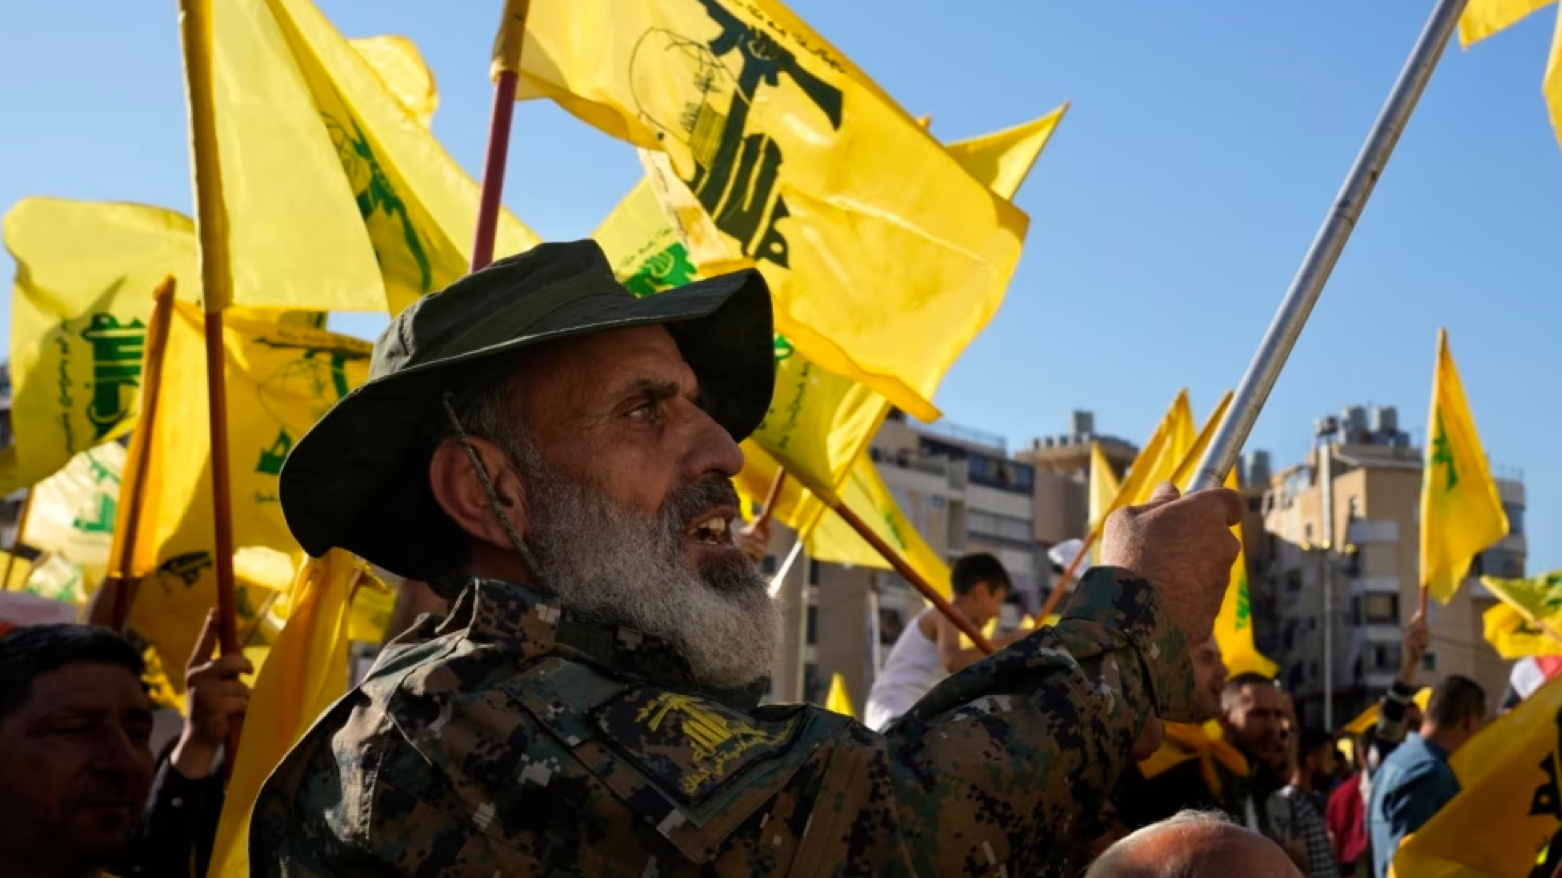 A Hizballah fighter waves his group's flag as he attends an election rally in a southern suburb of Beirut, Lebanon, May 10, 2022 (Photo: AP)